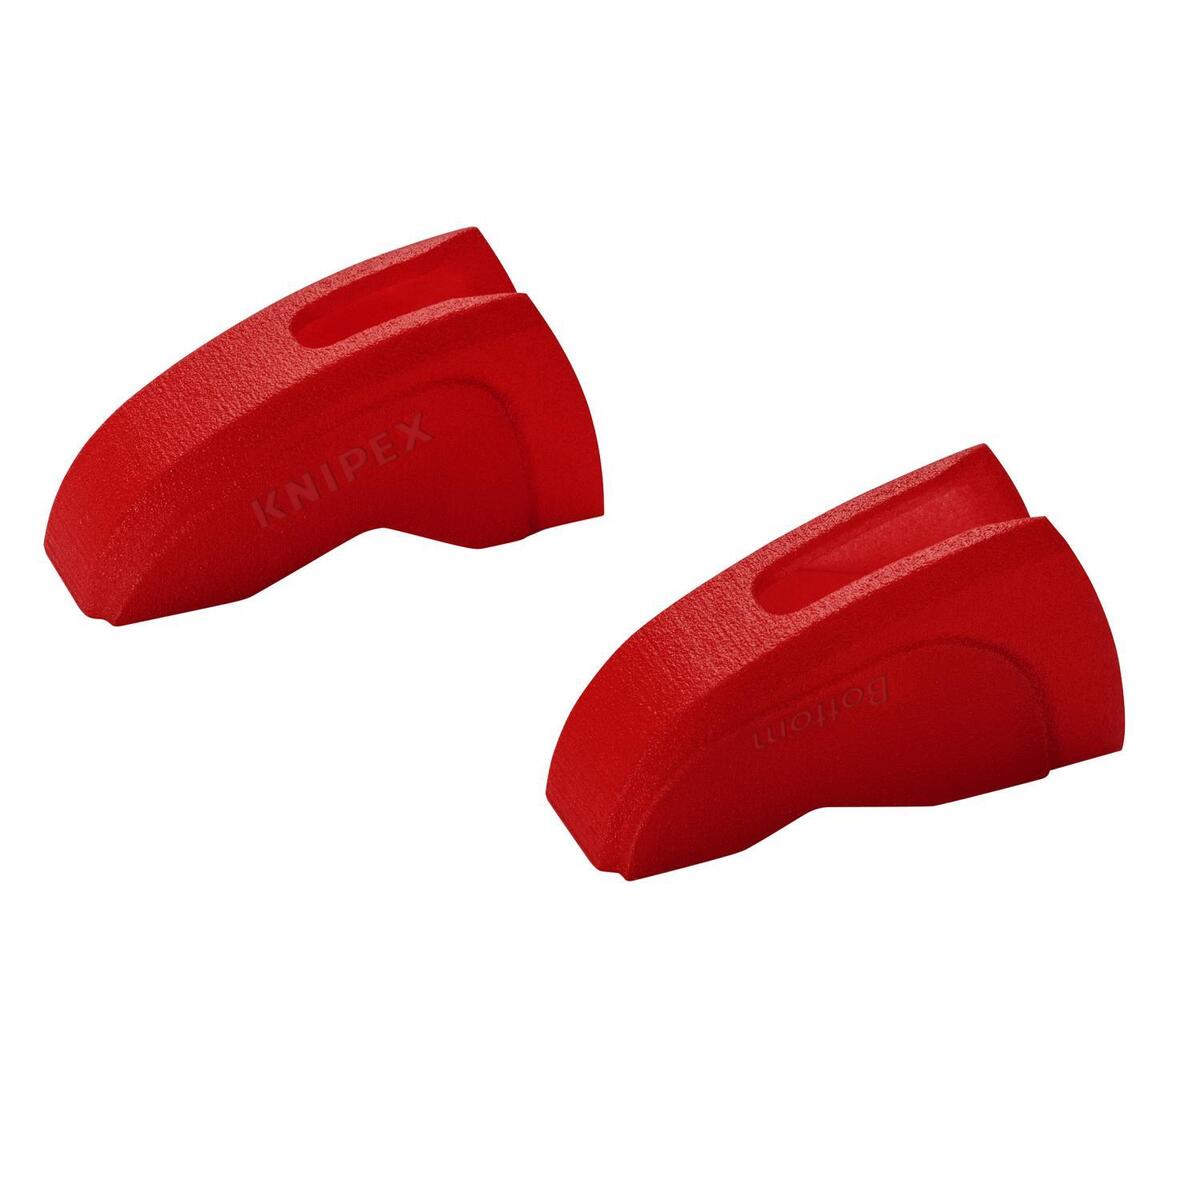 Knipex, plastic protective jaws (Set of 3)